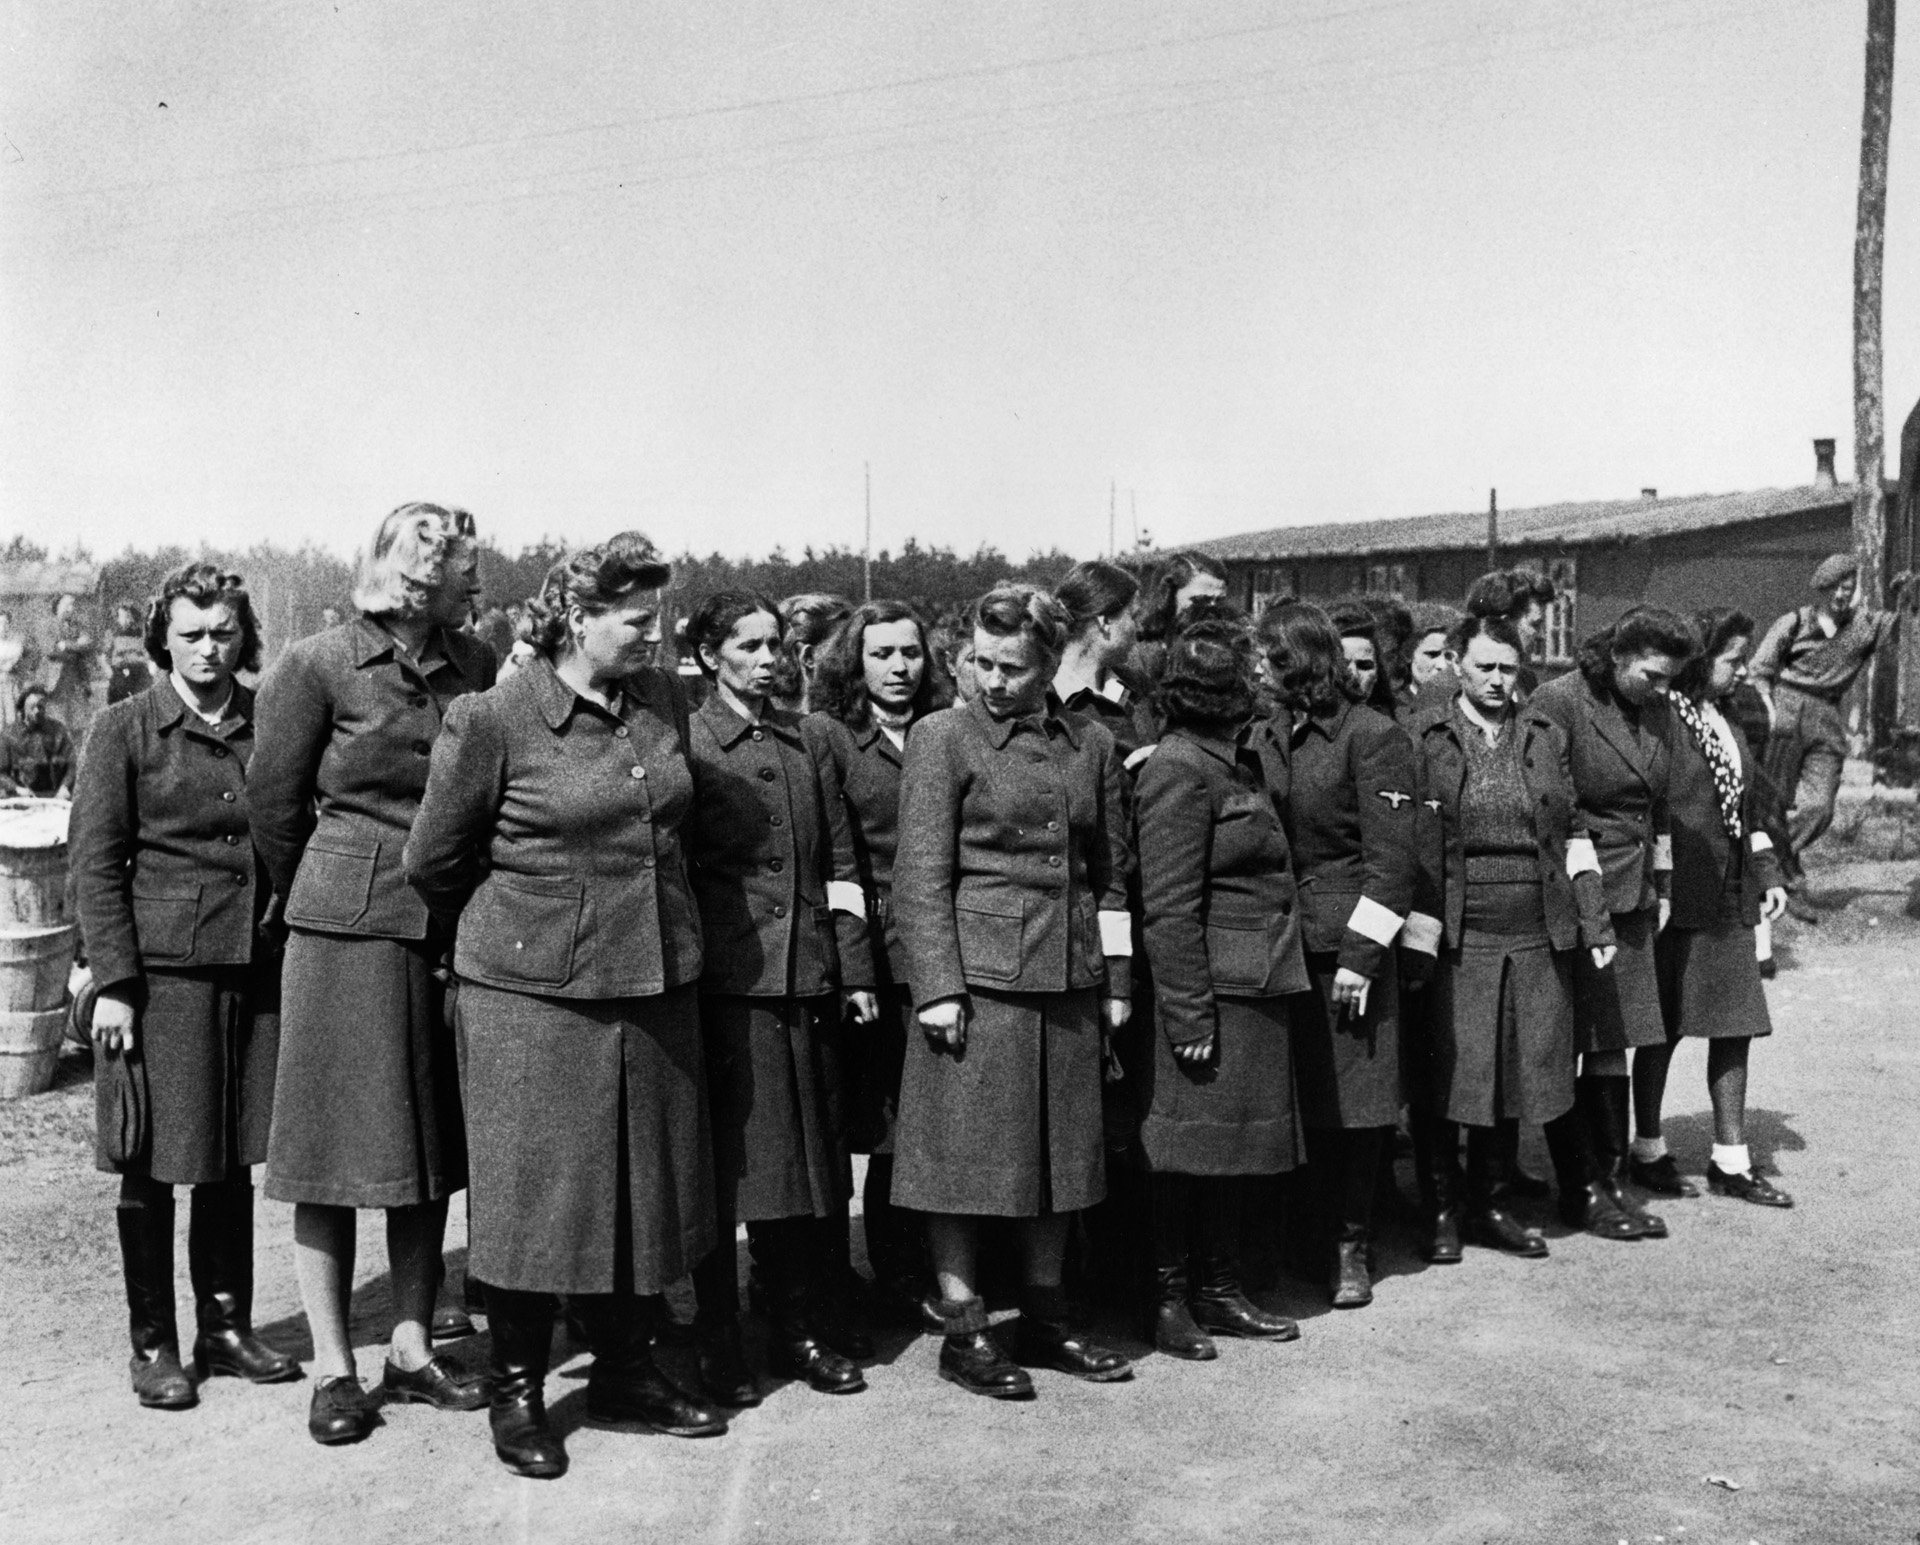 A group of female SS guards (Aufseherinnen) photographed on parade at Bergen-Belsen in 1945.